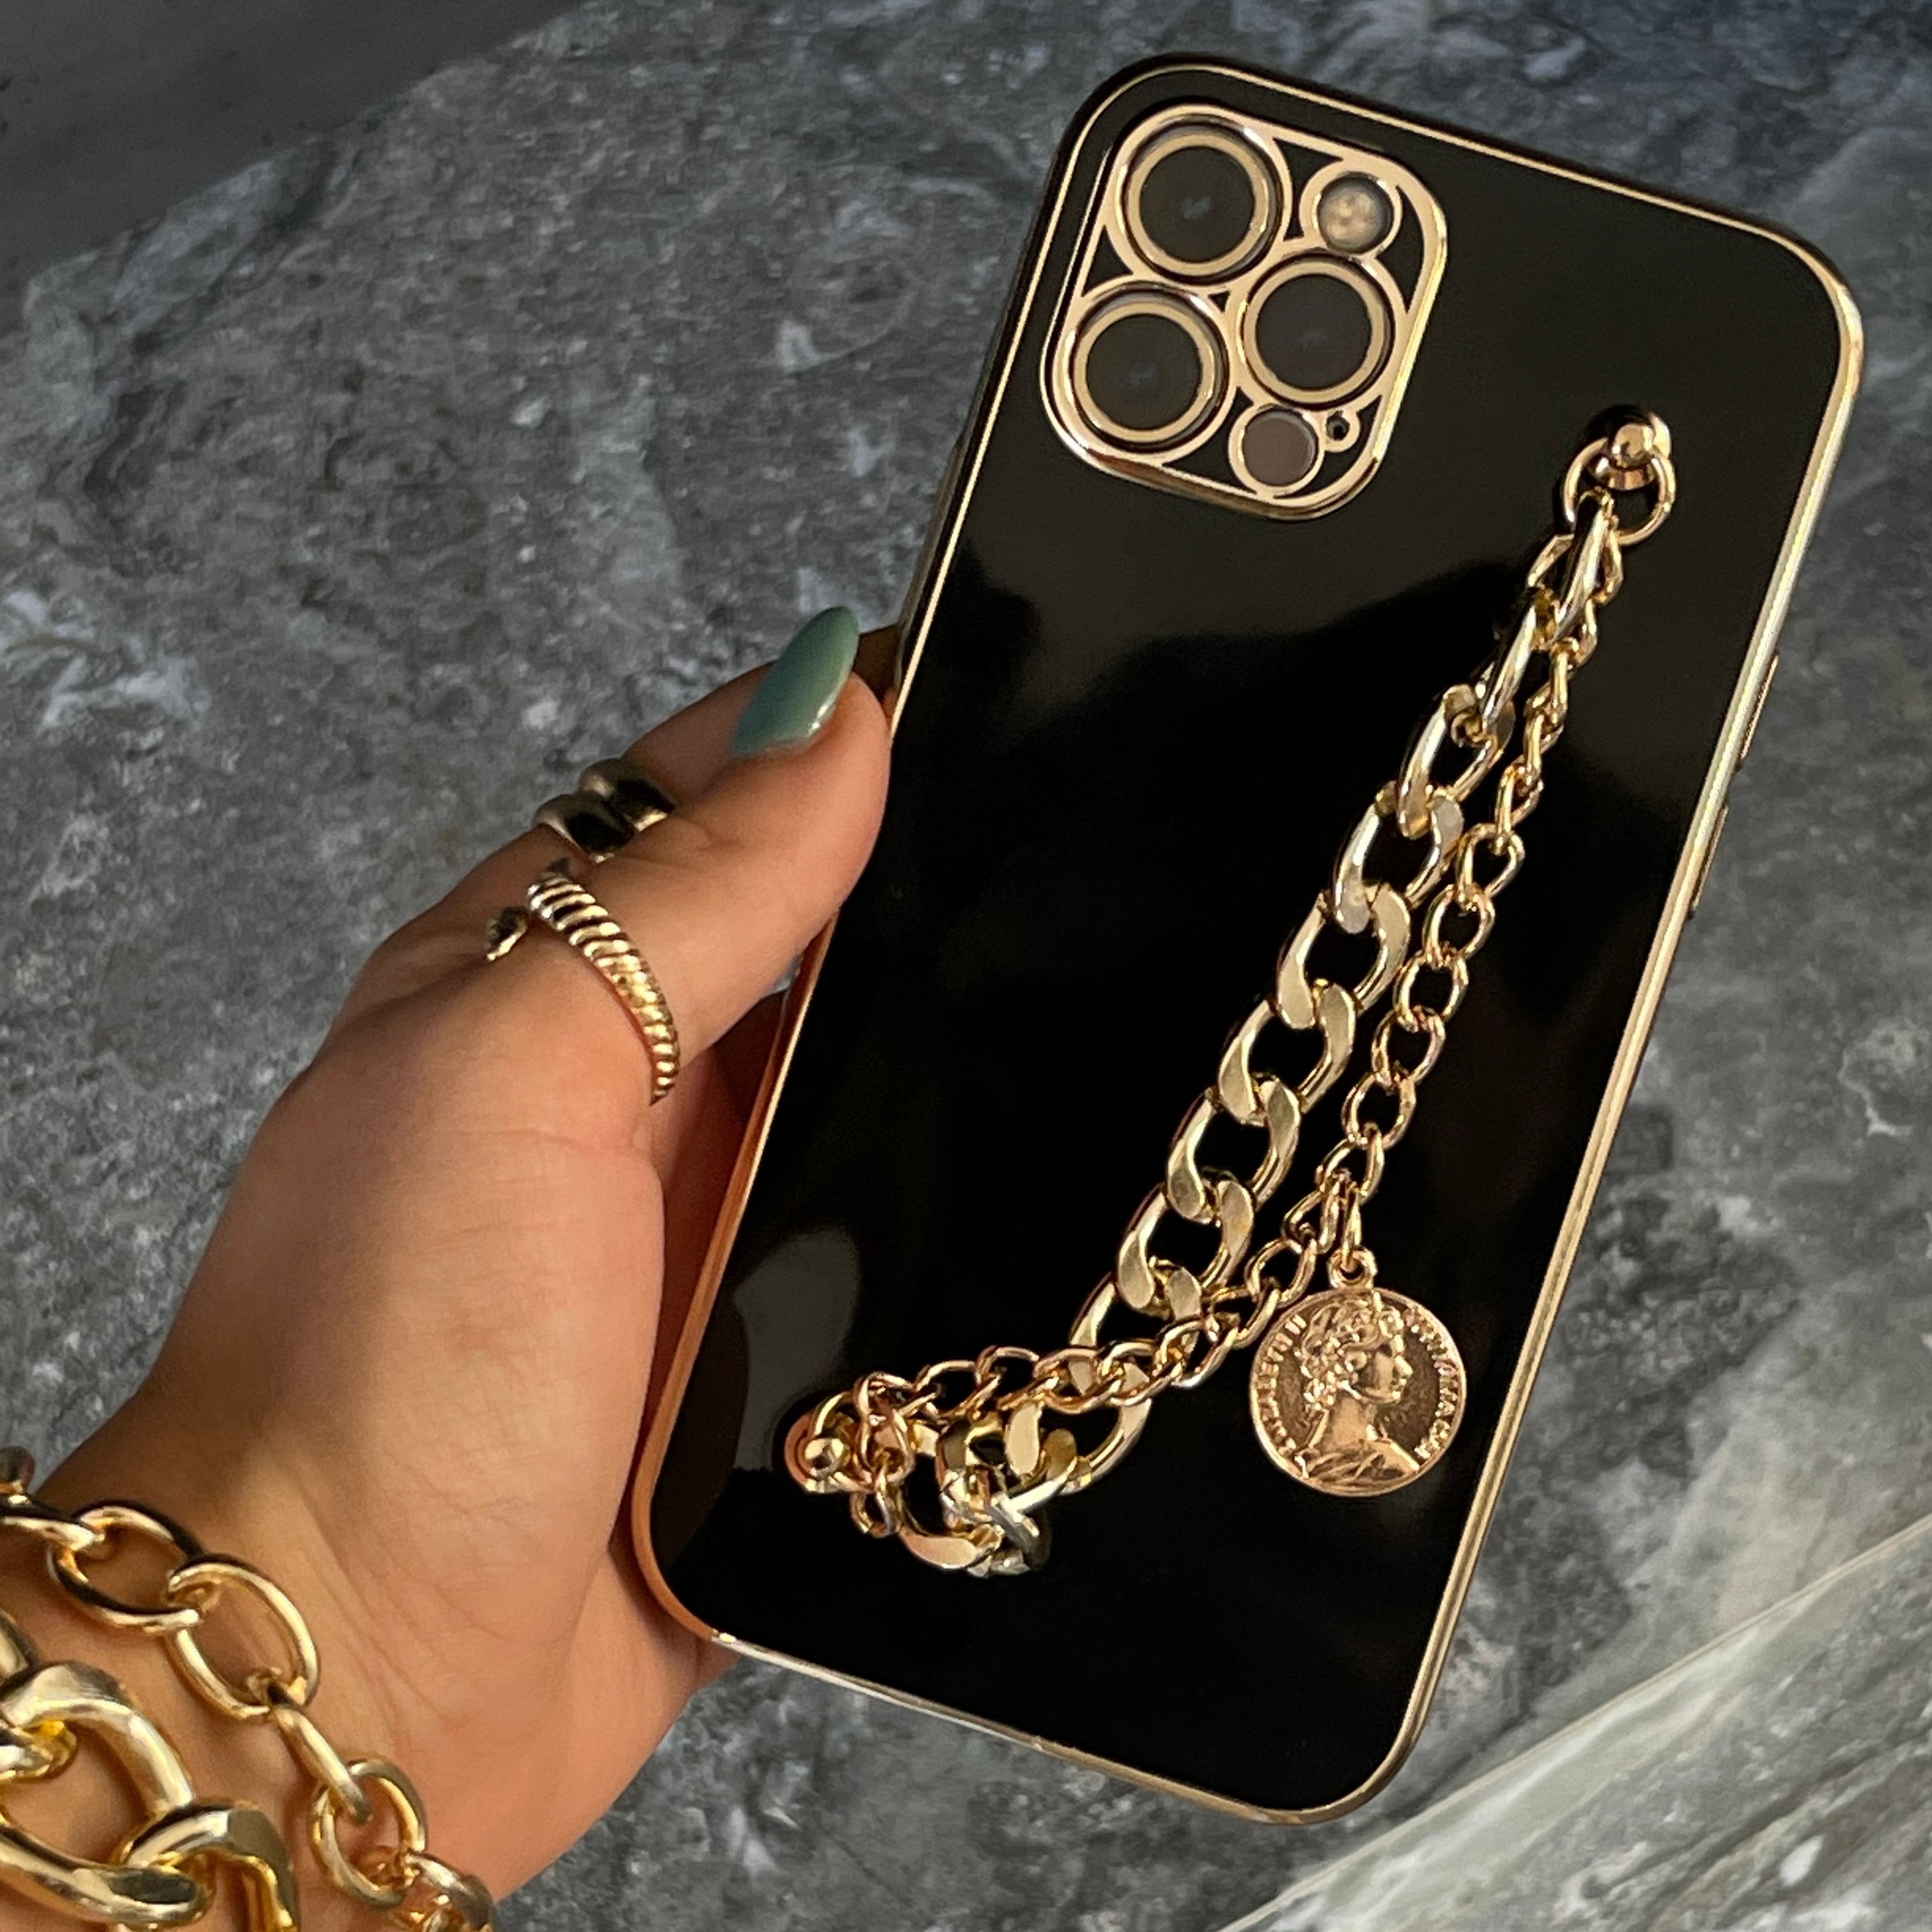  Shiny Gold Chain Bracelet PU Leather case for iPhone